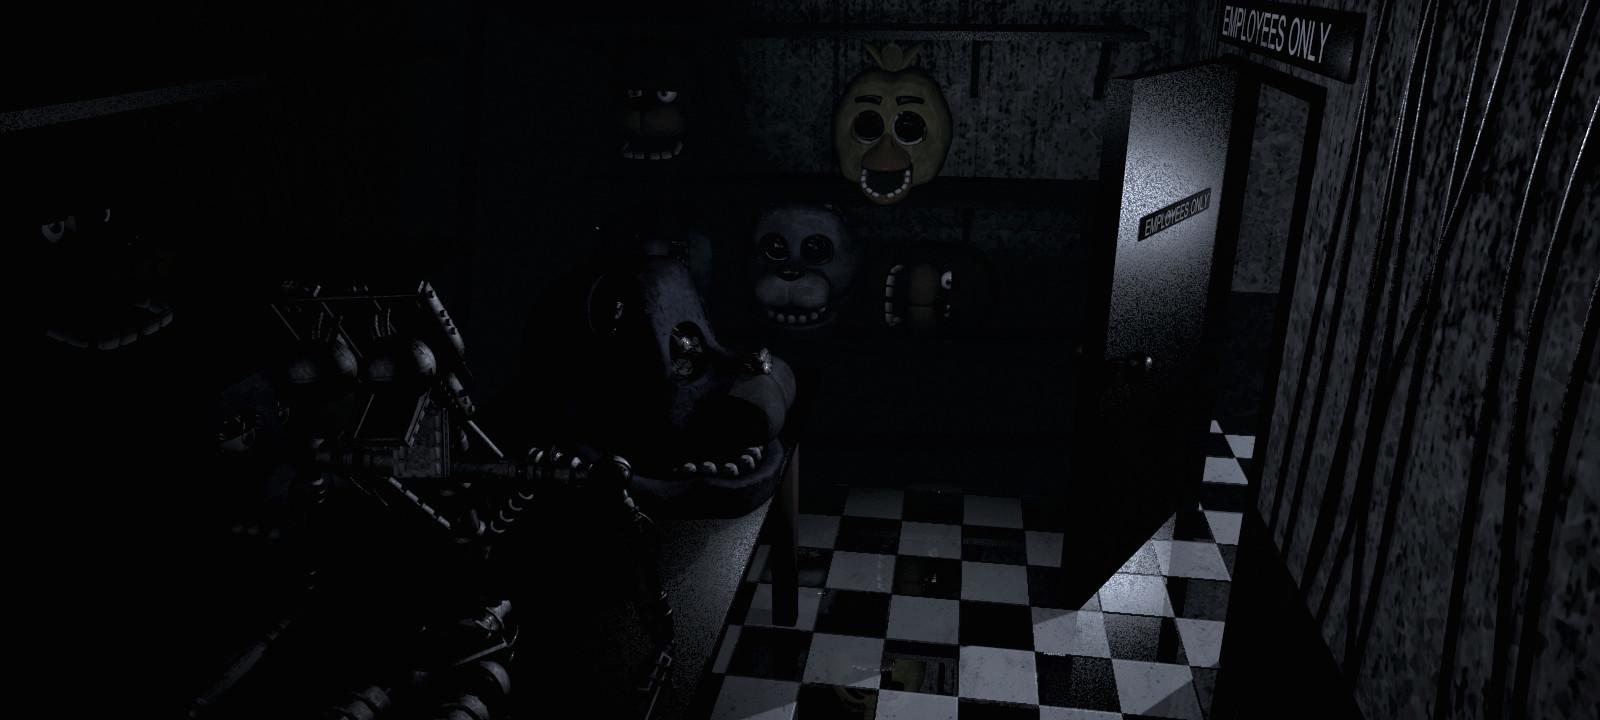 Backstage. Five Nights at Freddy's